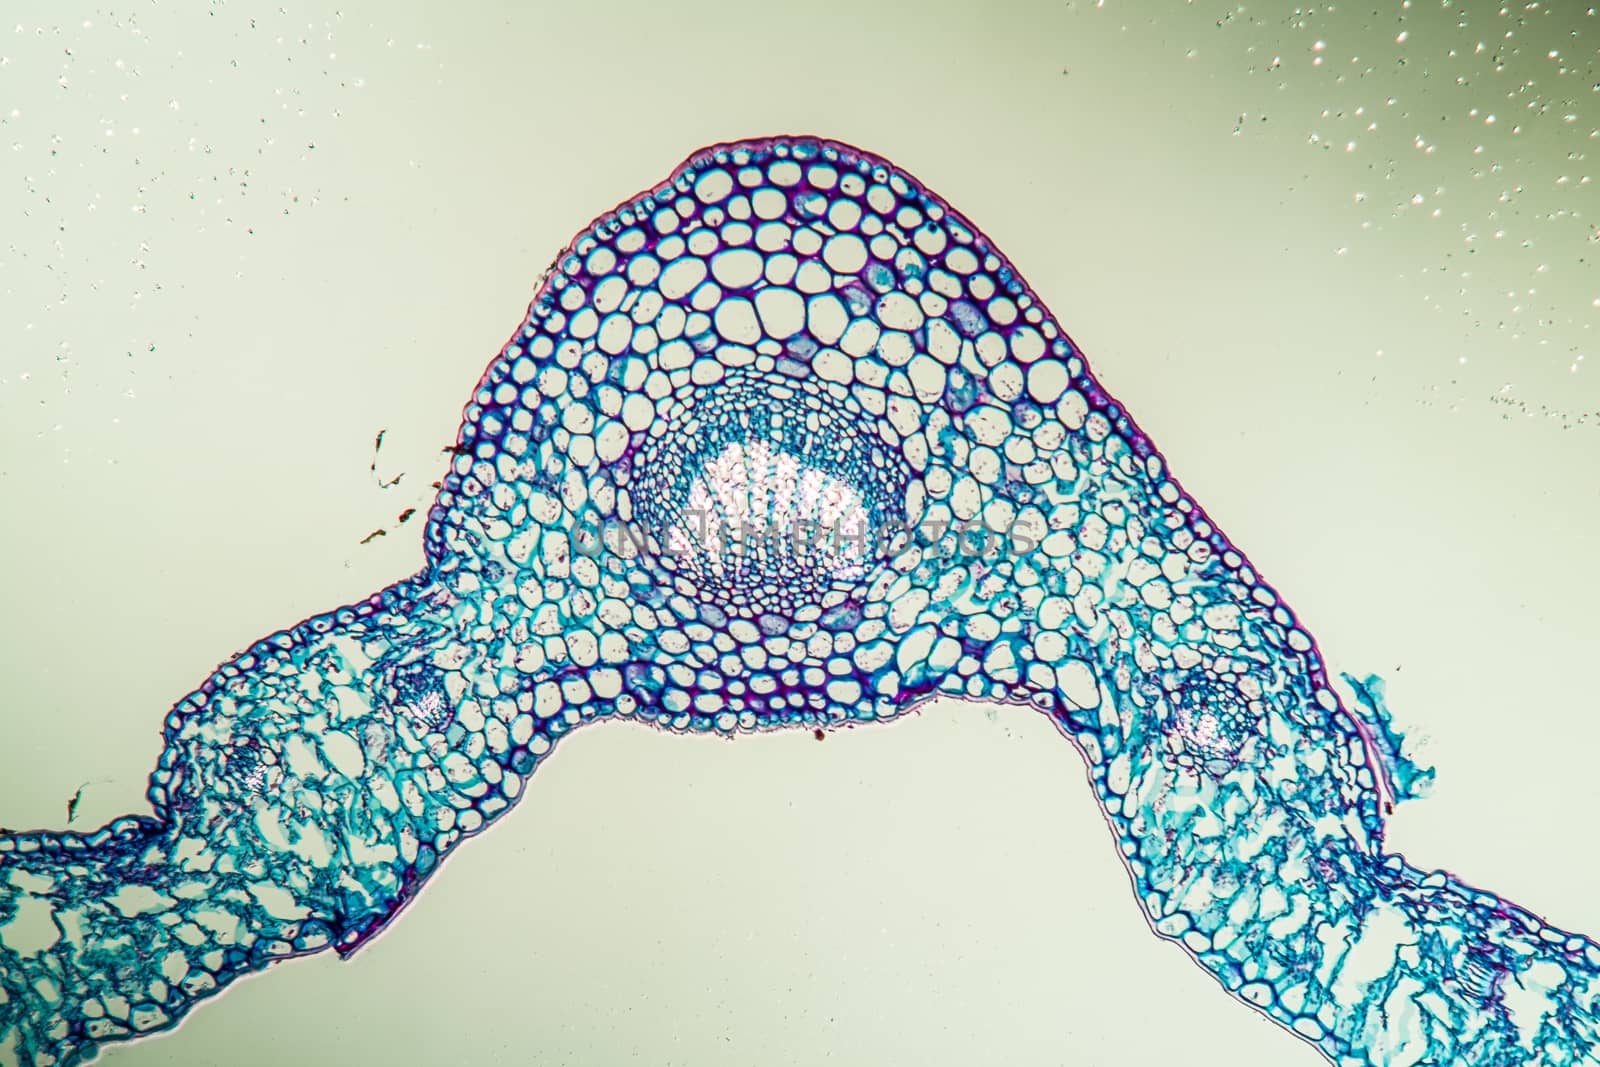 Linguster leaf cross section under the microscope 100x